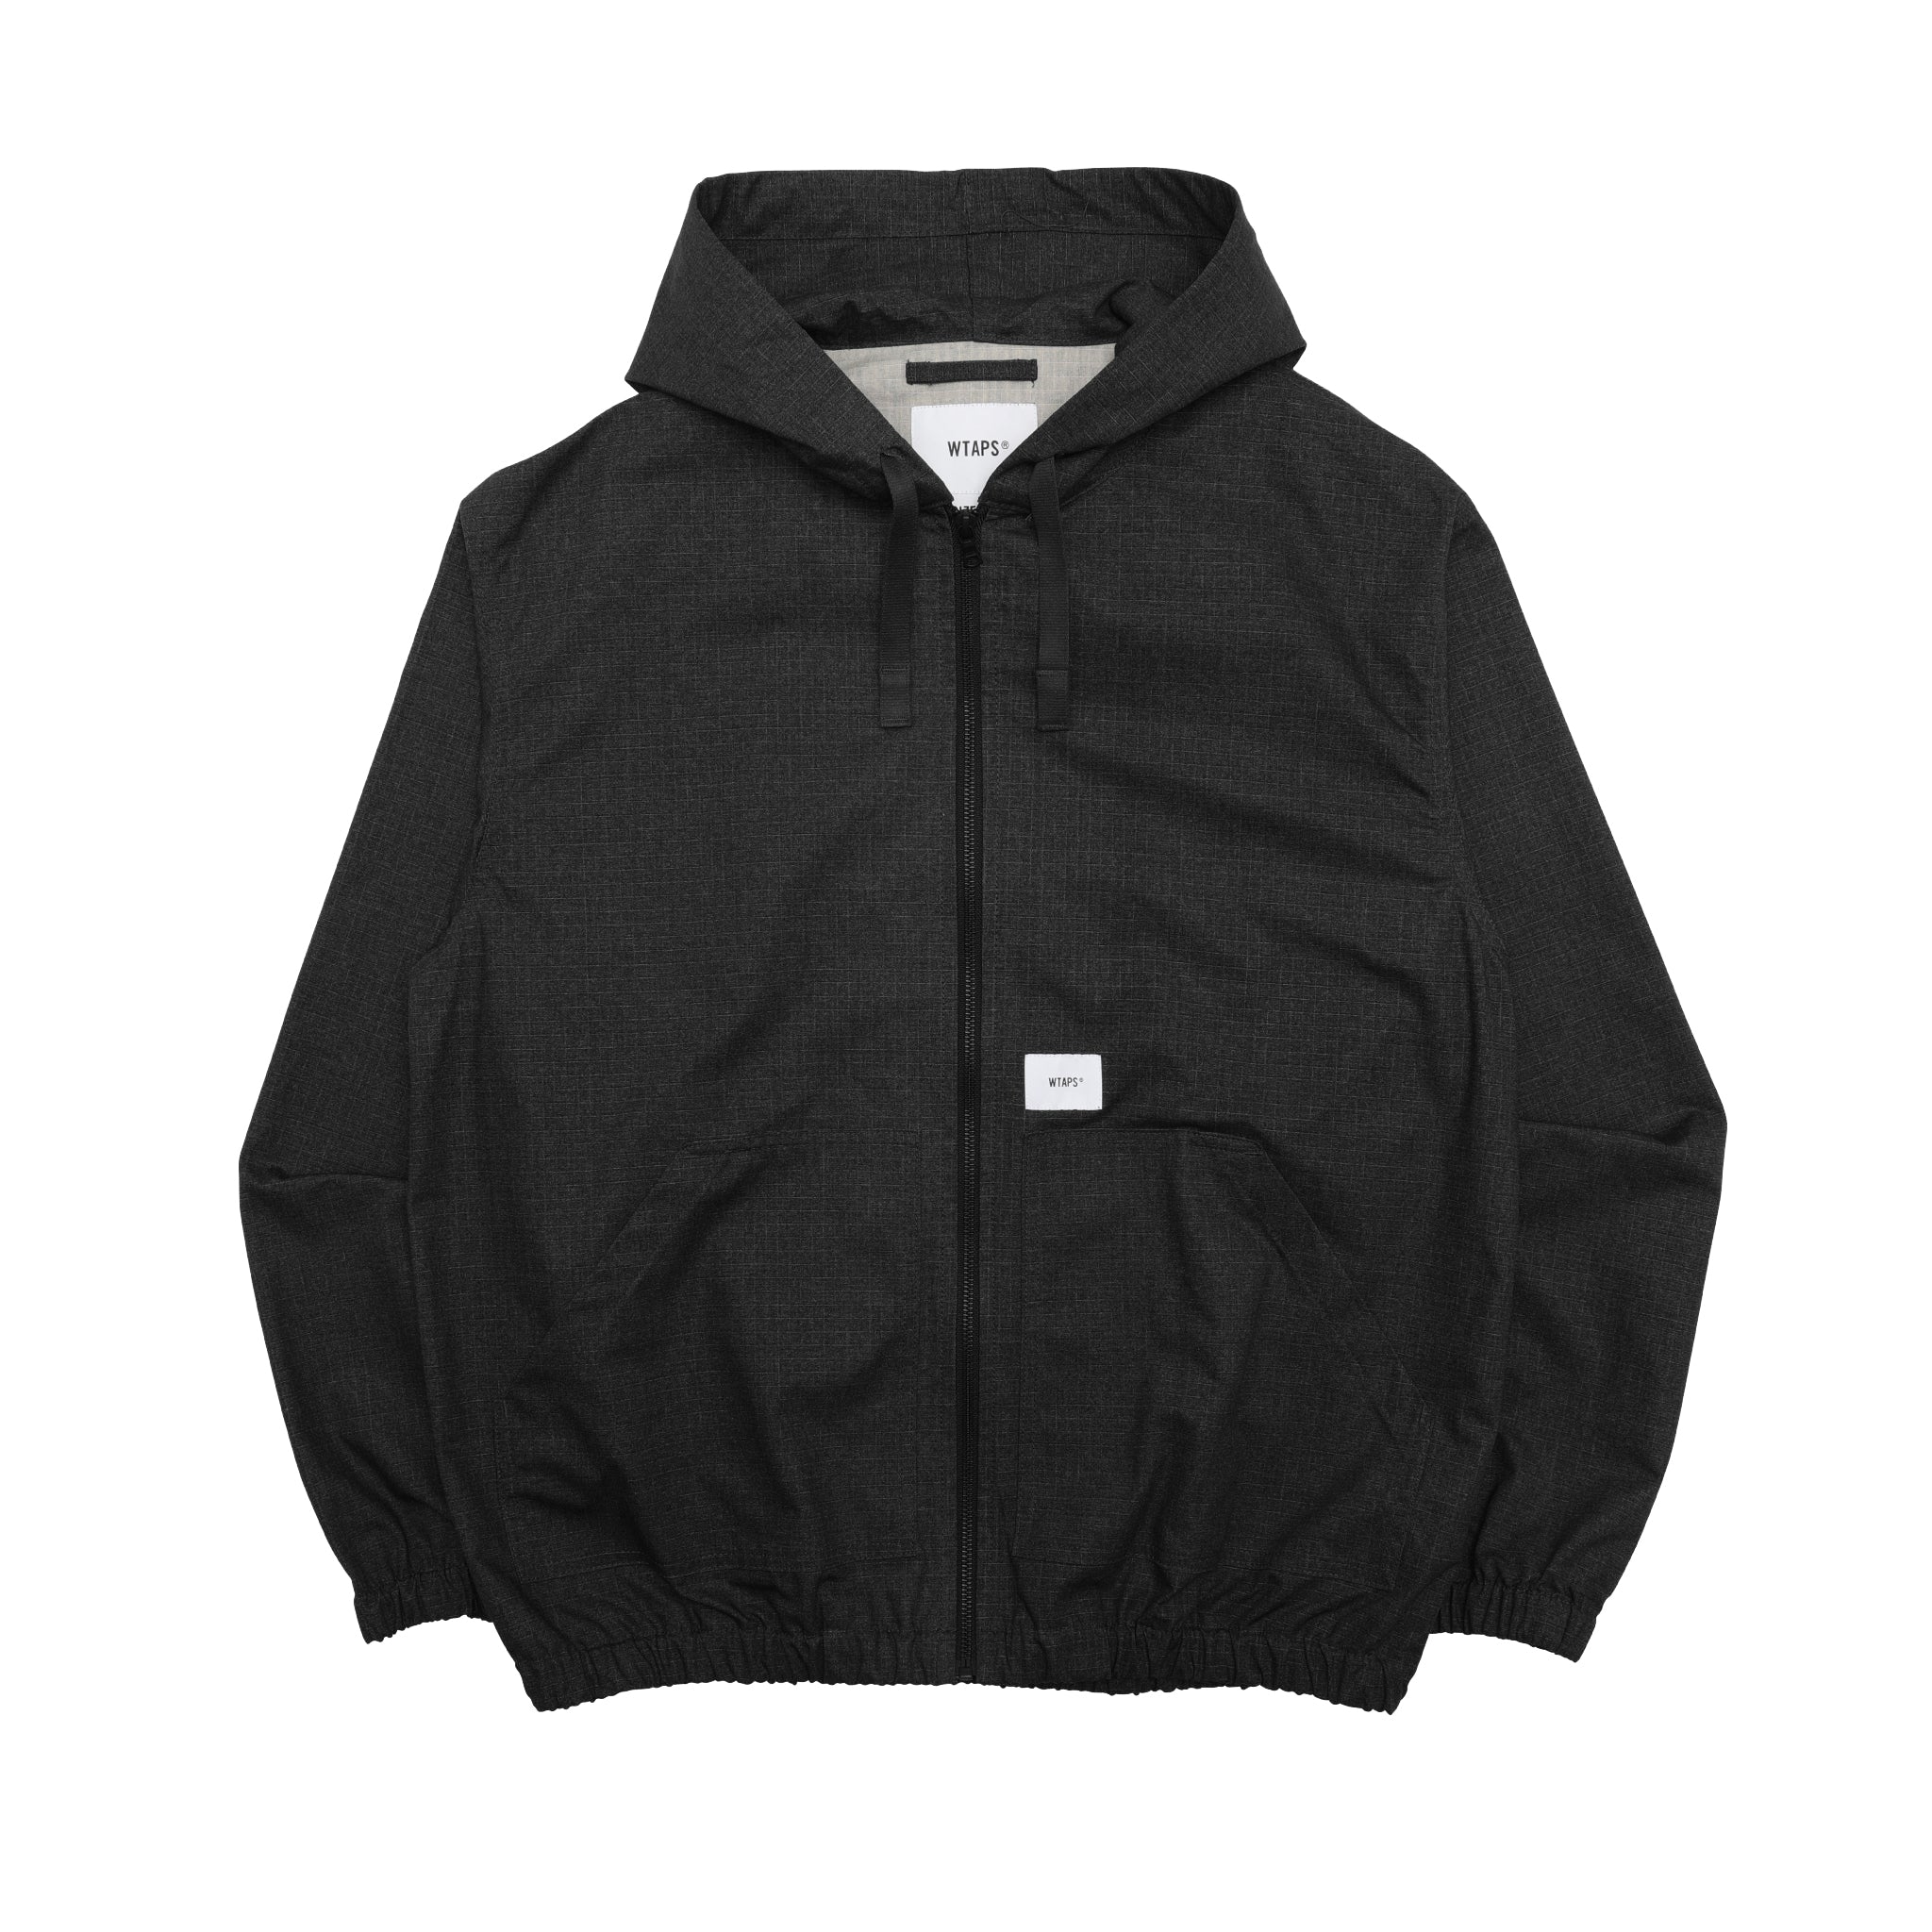 Pab / Jacket / Cotton. Ripstop – INVINCIBLE Indonesia